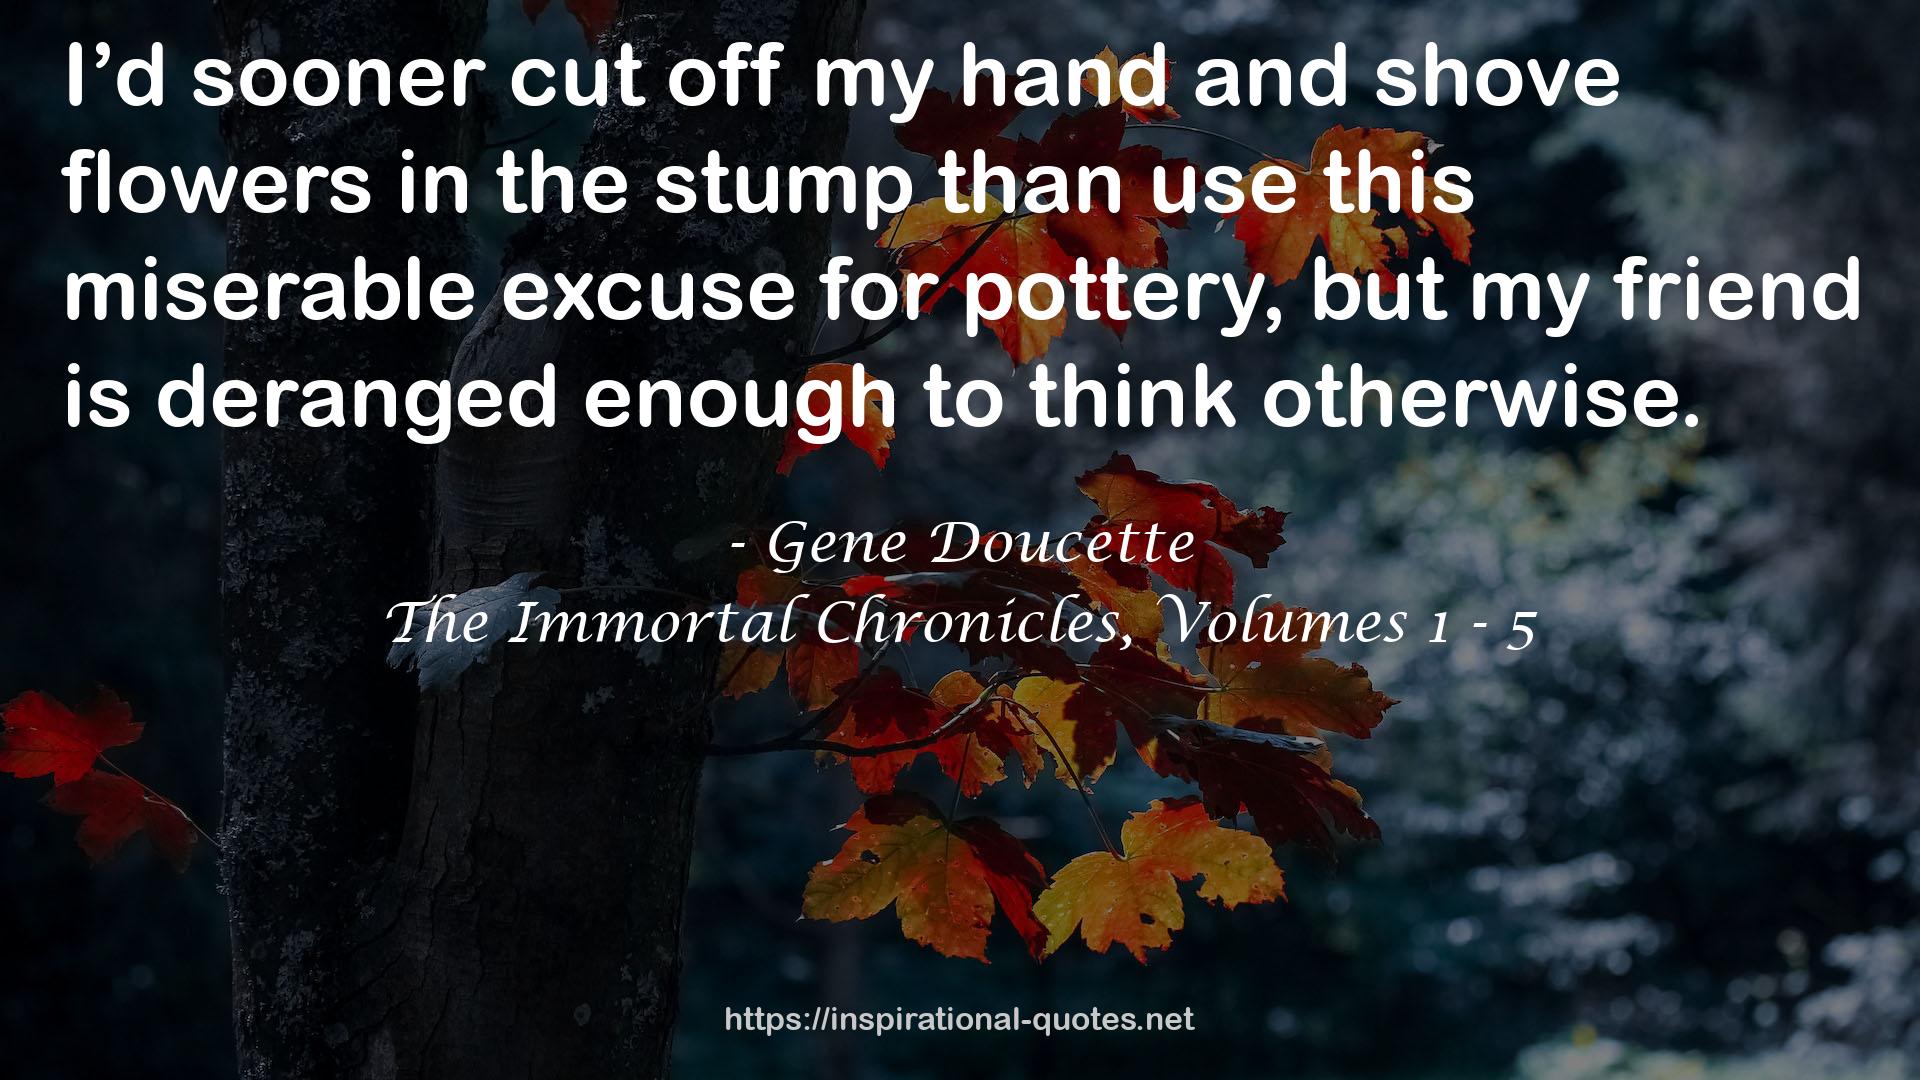 The Immortal Chronicles, Volumes 1 - 5 QUOTES